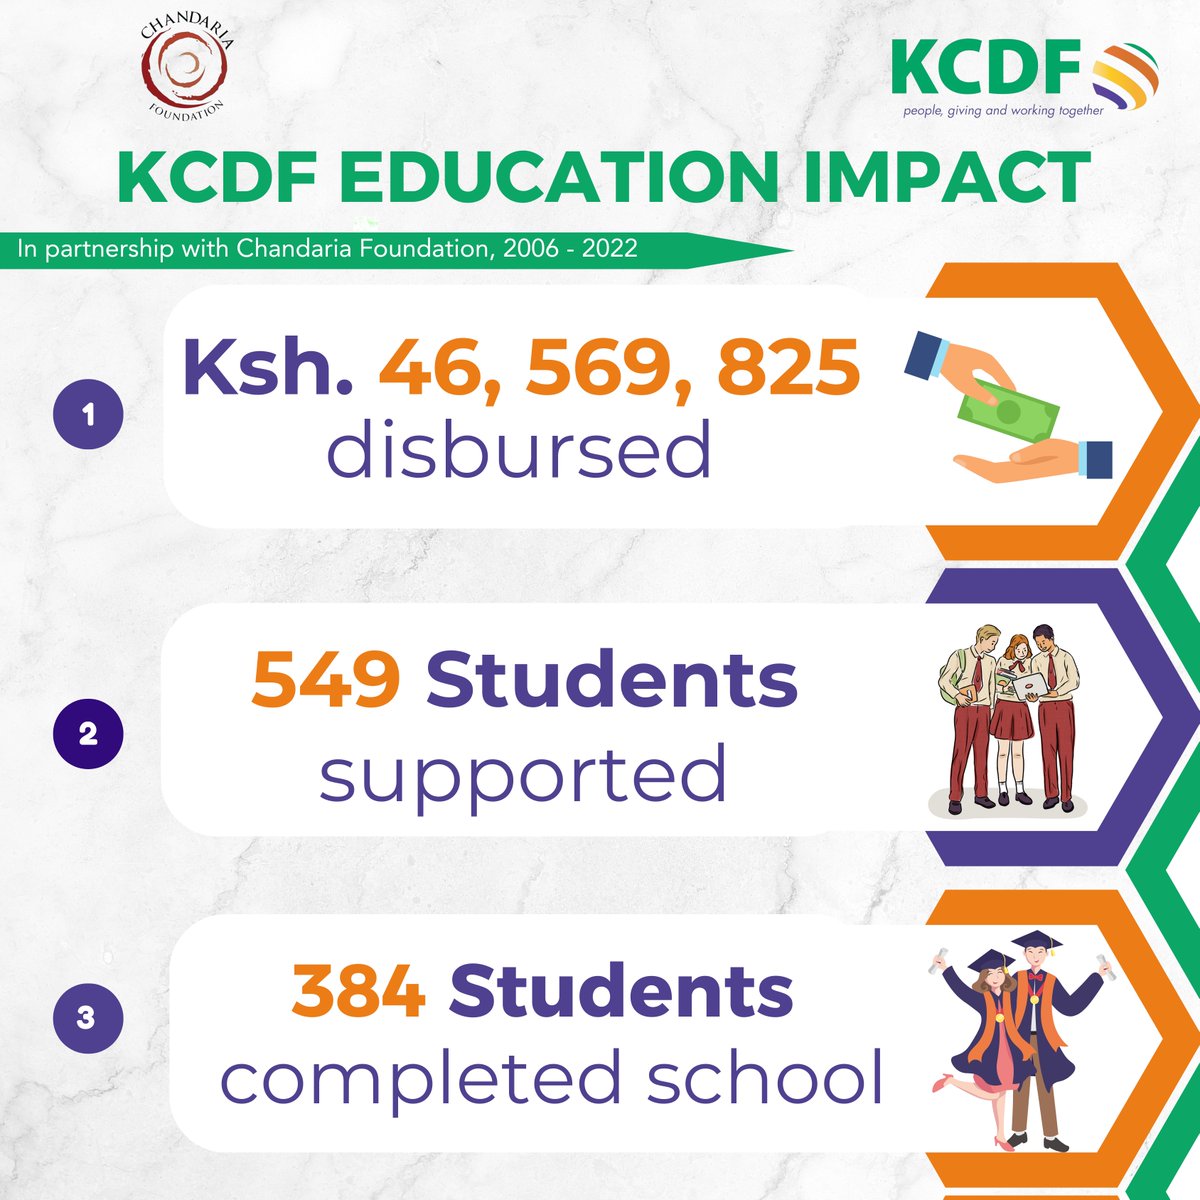 Since 2006, KCDF in partnership with Chandaria Foundation has been paving the way for a brighter future by giving underprivileged children in our communities the chance to access quality education #EducationForAll #InvestingInEducation #KCDFImpactingCommunities #OpportunityForAll